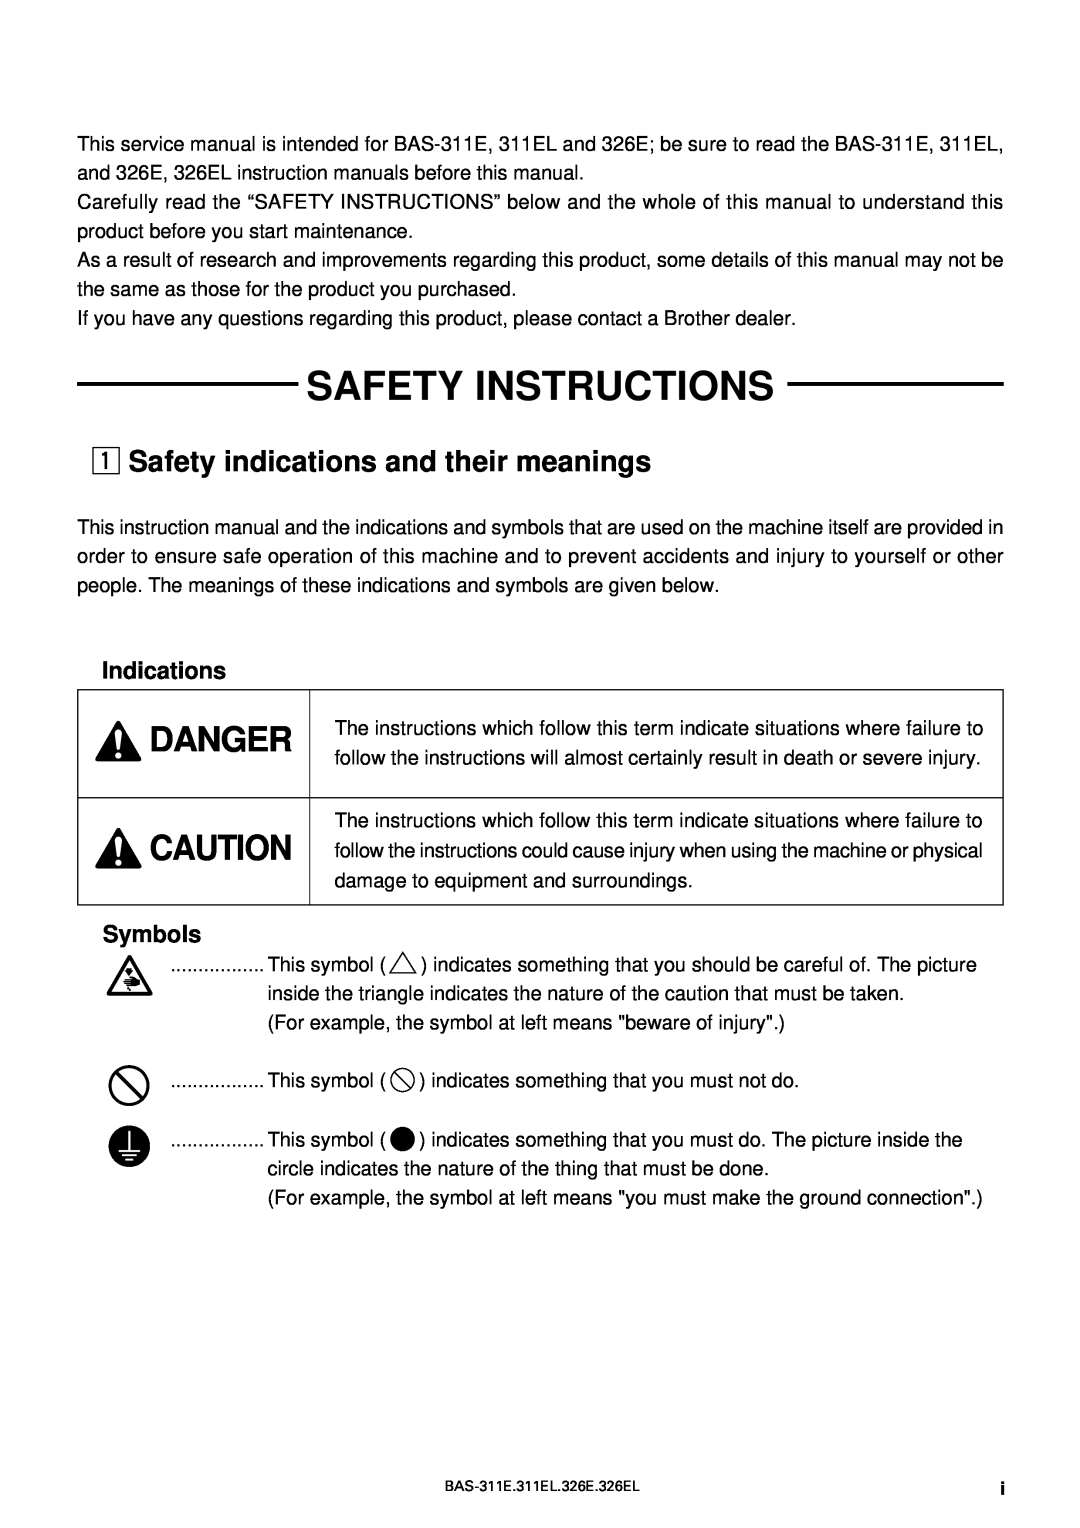 Brother BAS-311E service manual Danger, z Safety indications and their meanings, Indications, Symbols, Safety Instructions 